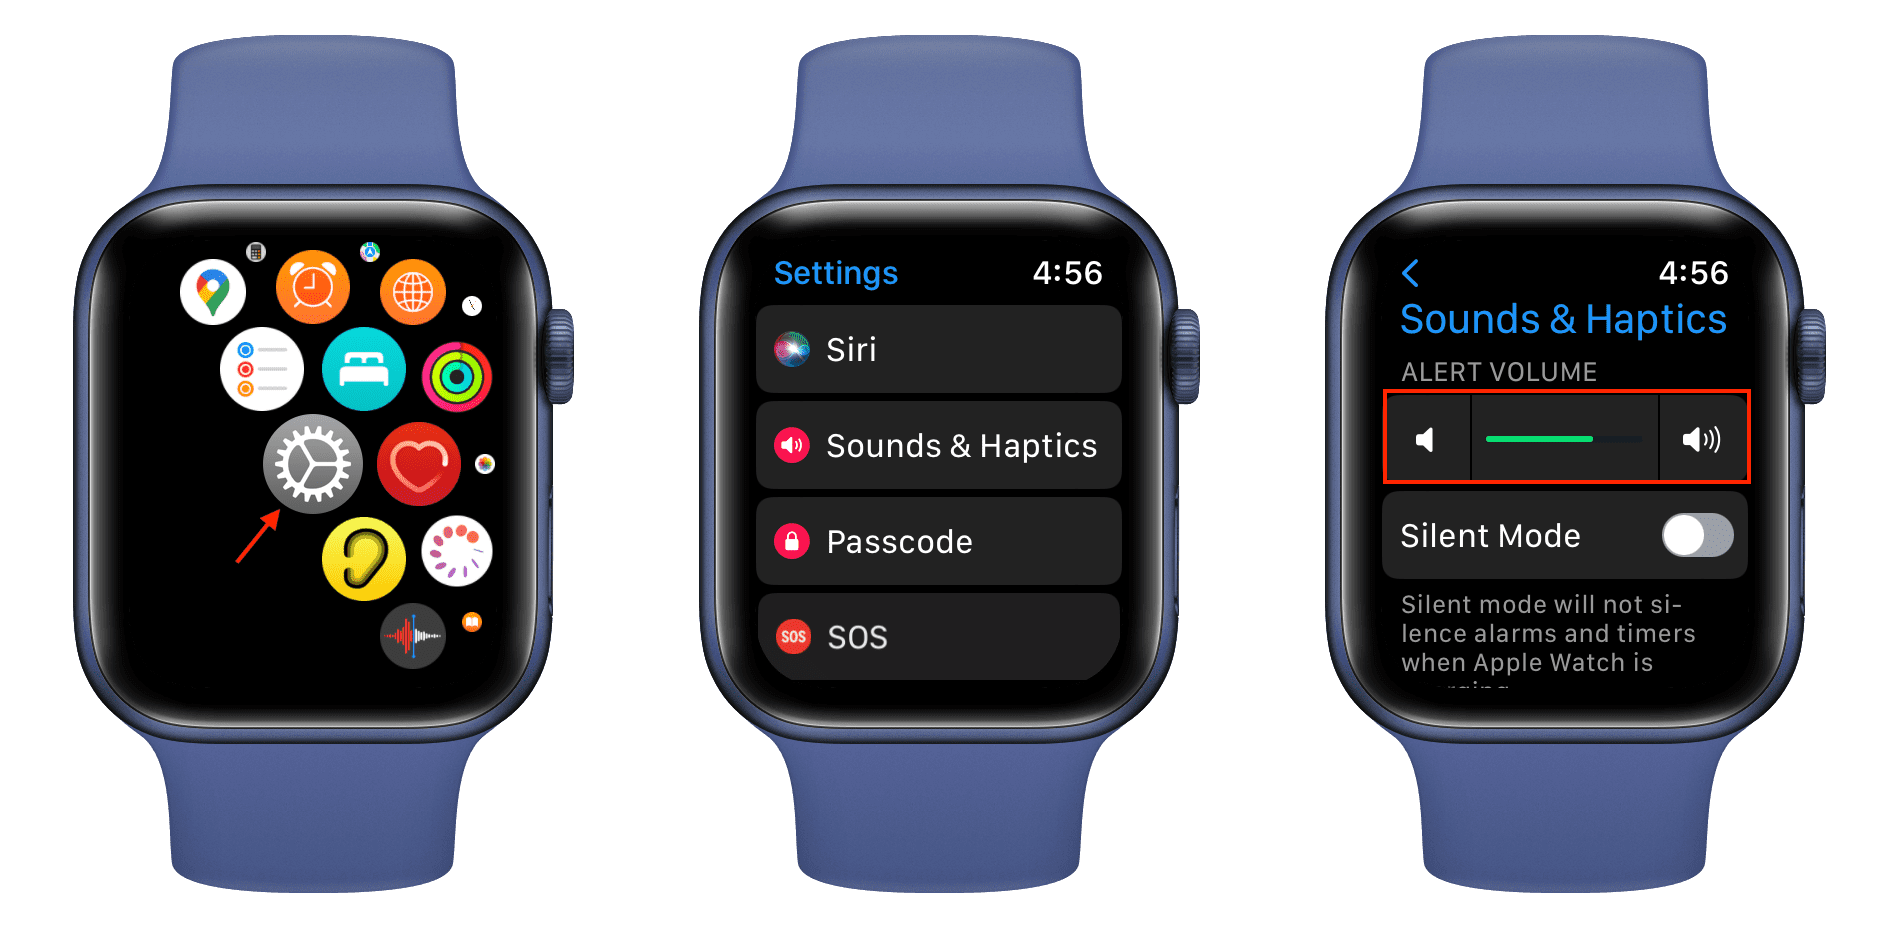 Sounds and Haptics settings on Apple Watch to adjust alerts volume